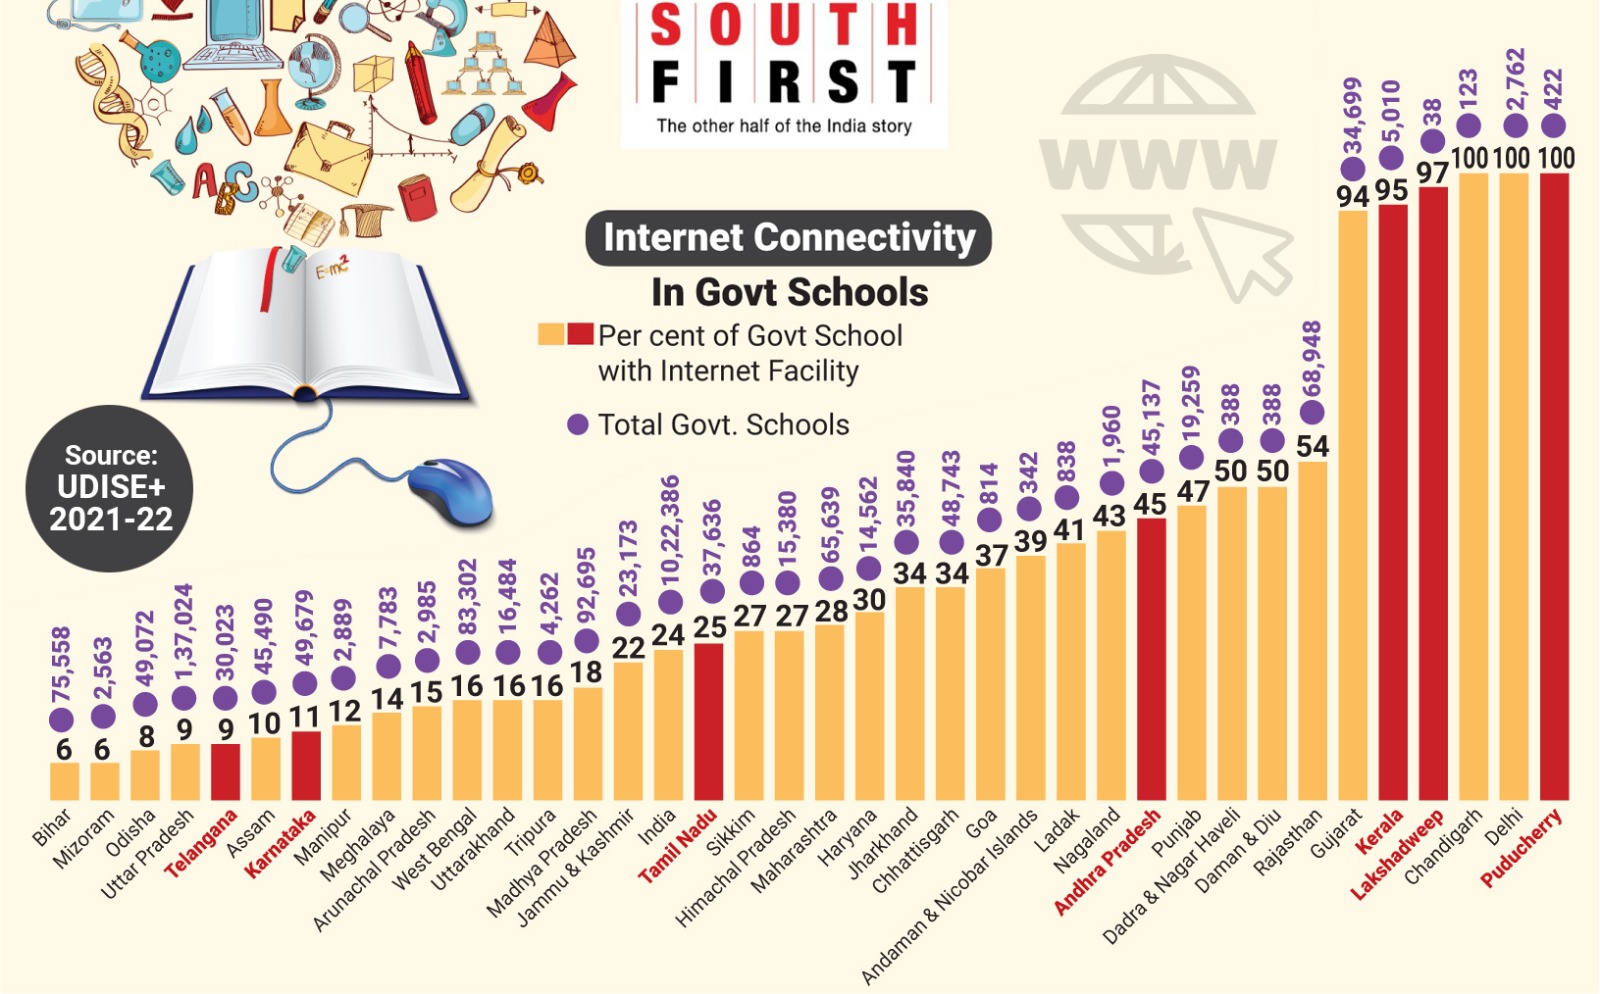 Internet connectivity in government schools across India.